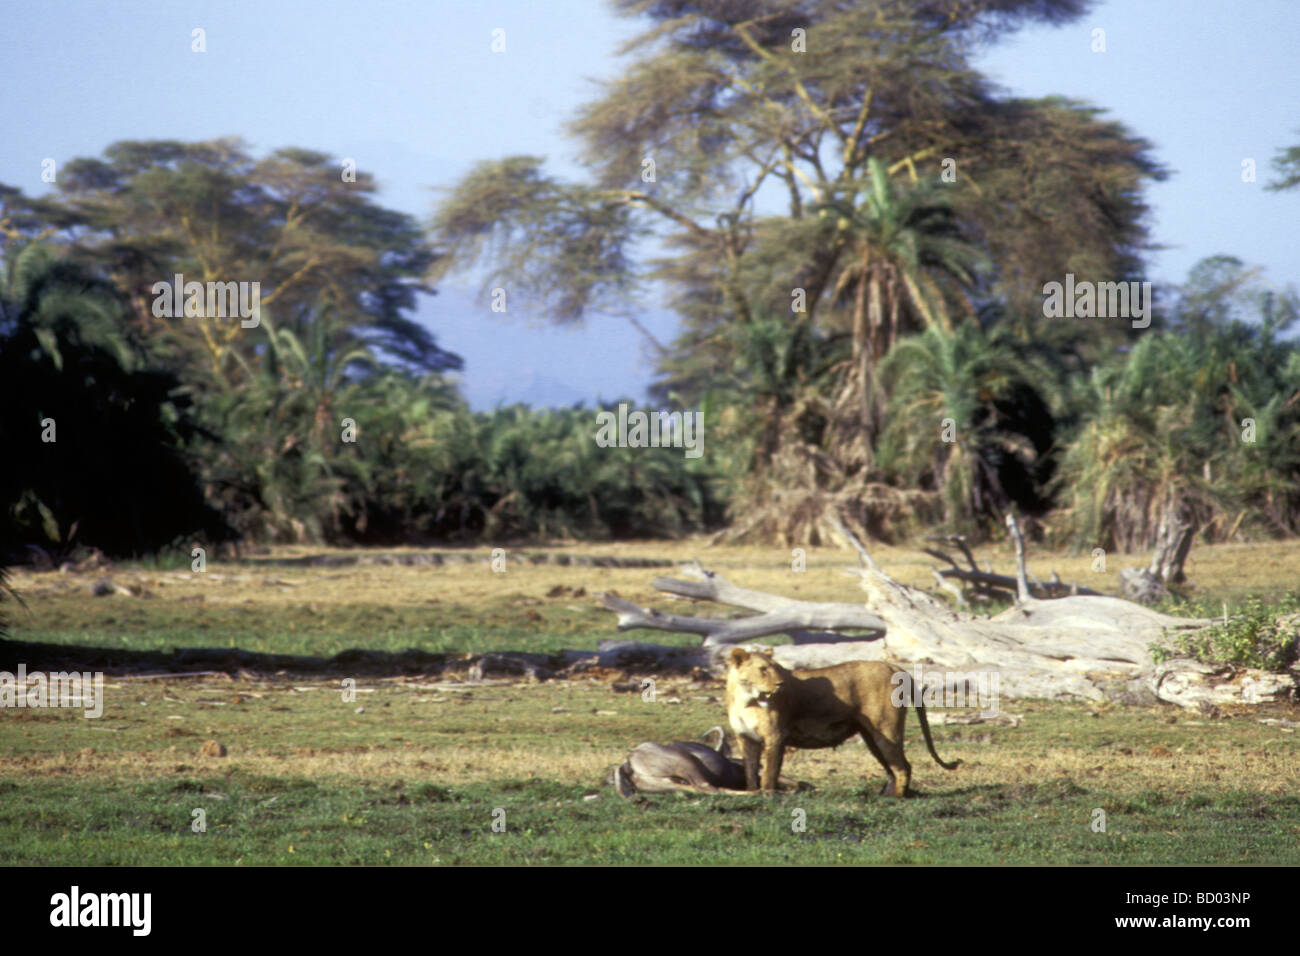 Lioness with dead wildebeest she has just killed Amboseli National Park Kenya East Africa Stock Photo